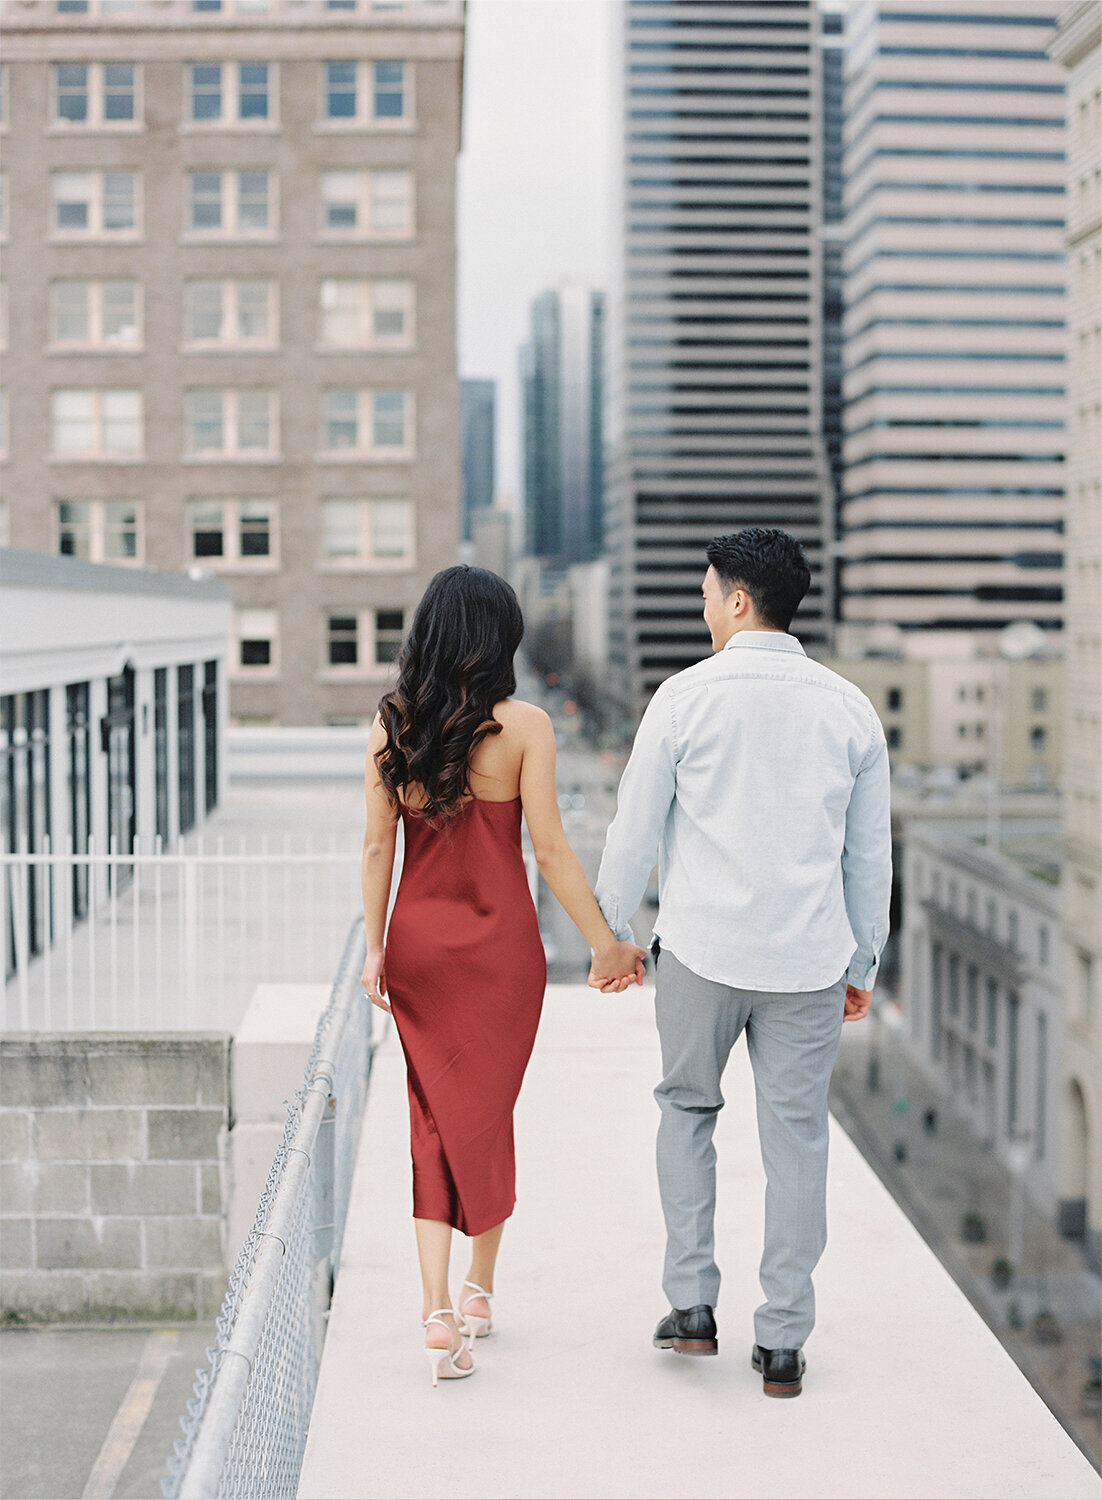 Seattle City Engagement Session on Film - Tetiana Photography - D&AJ - 2